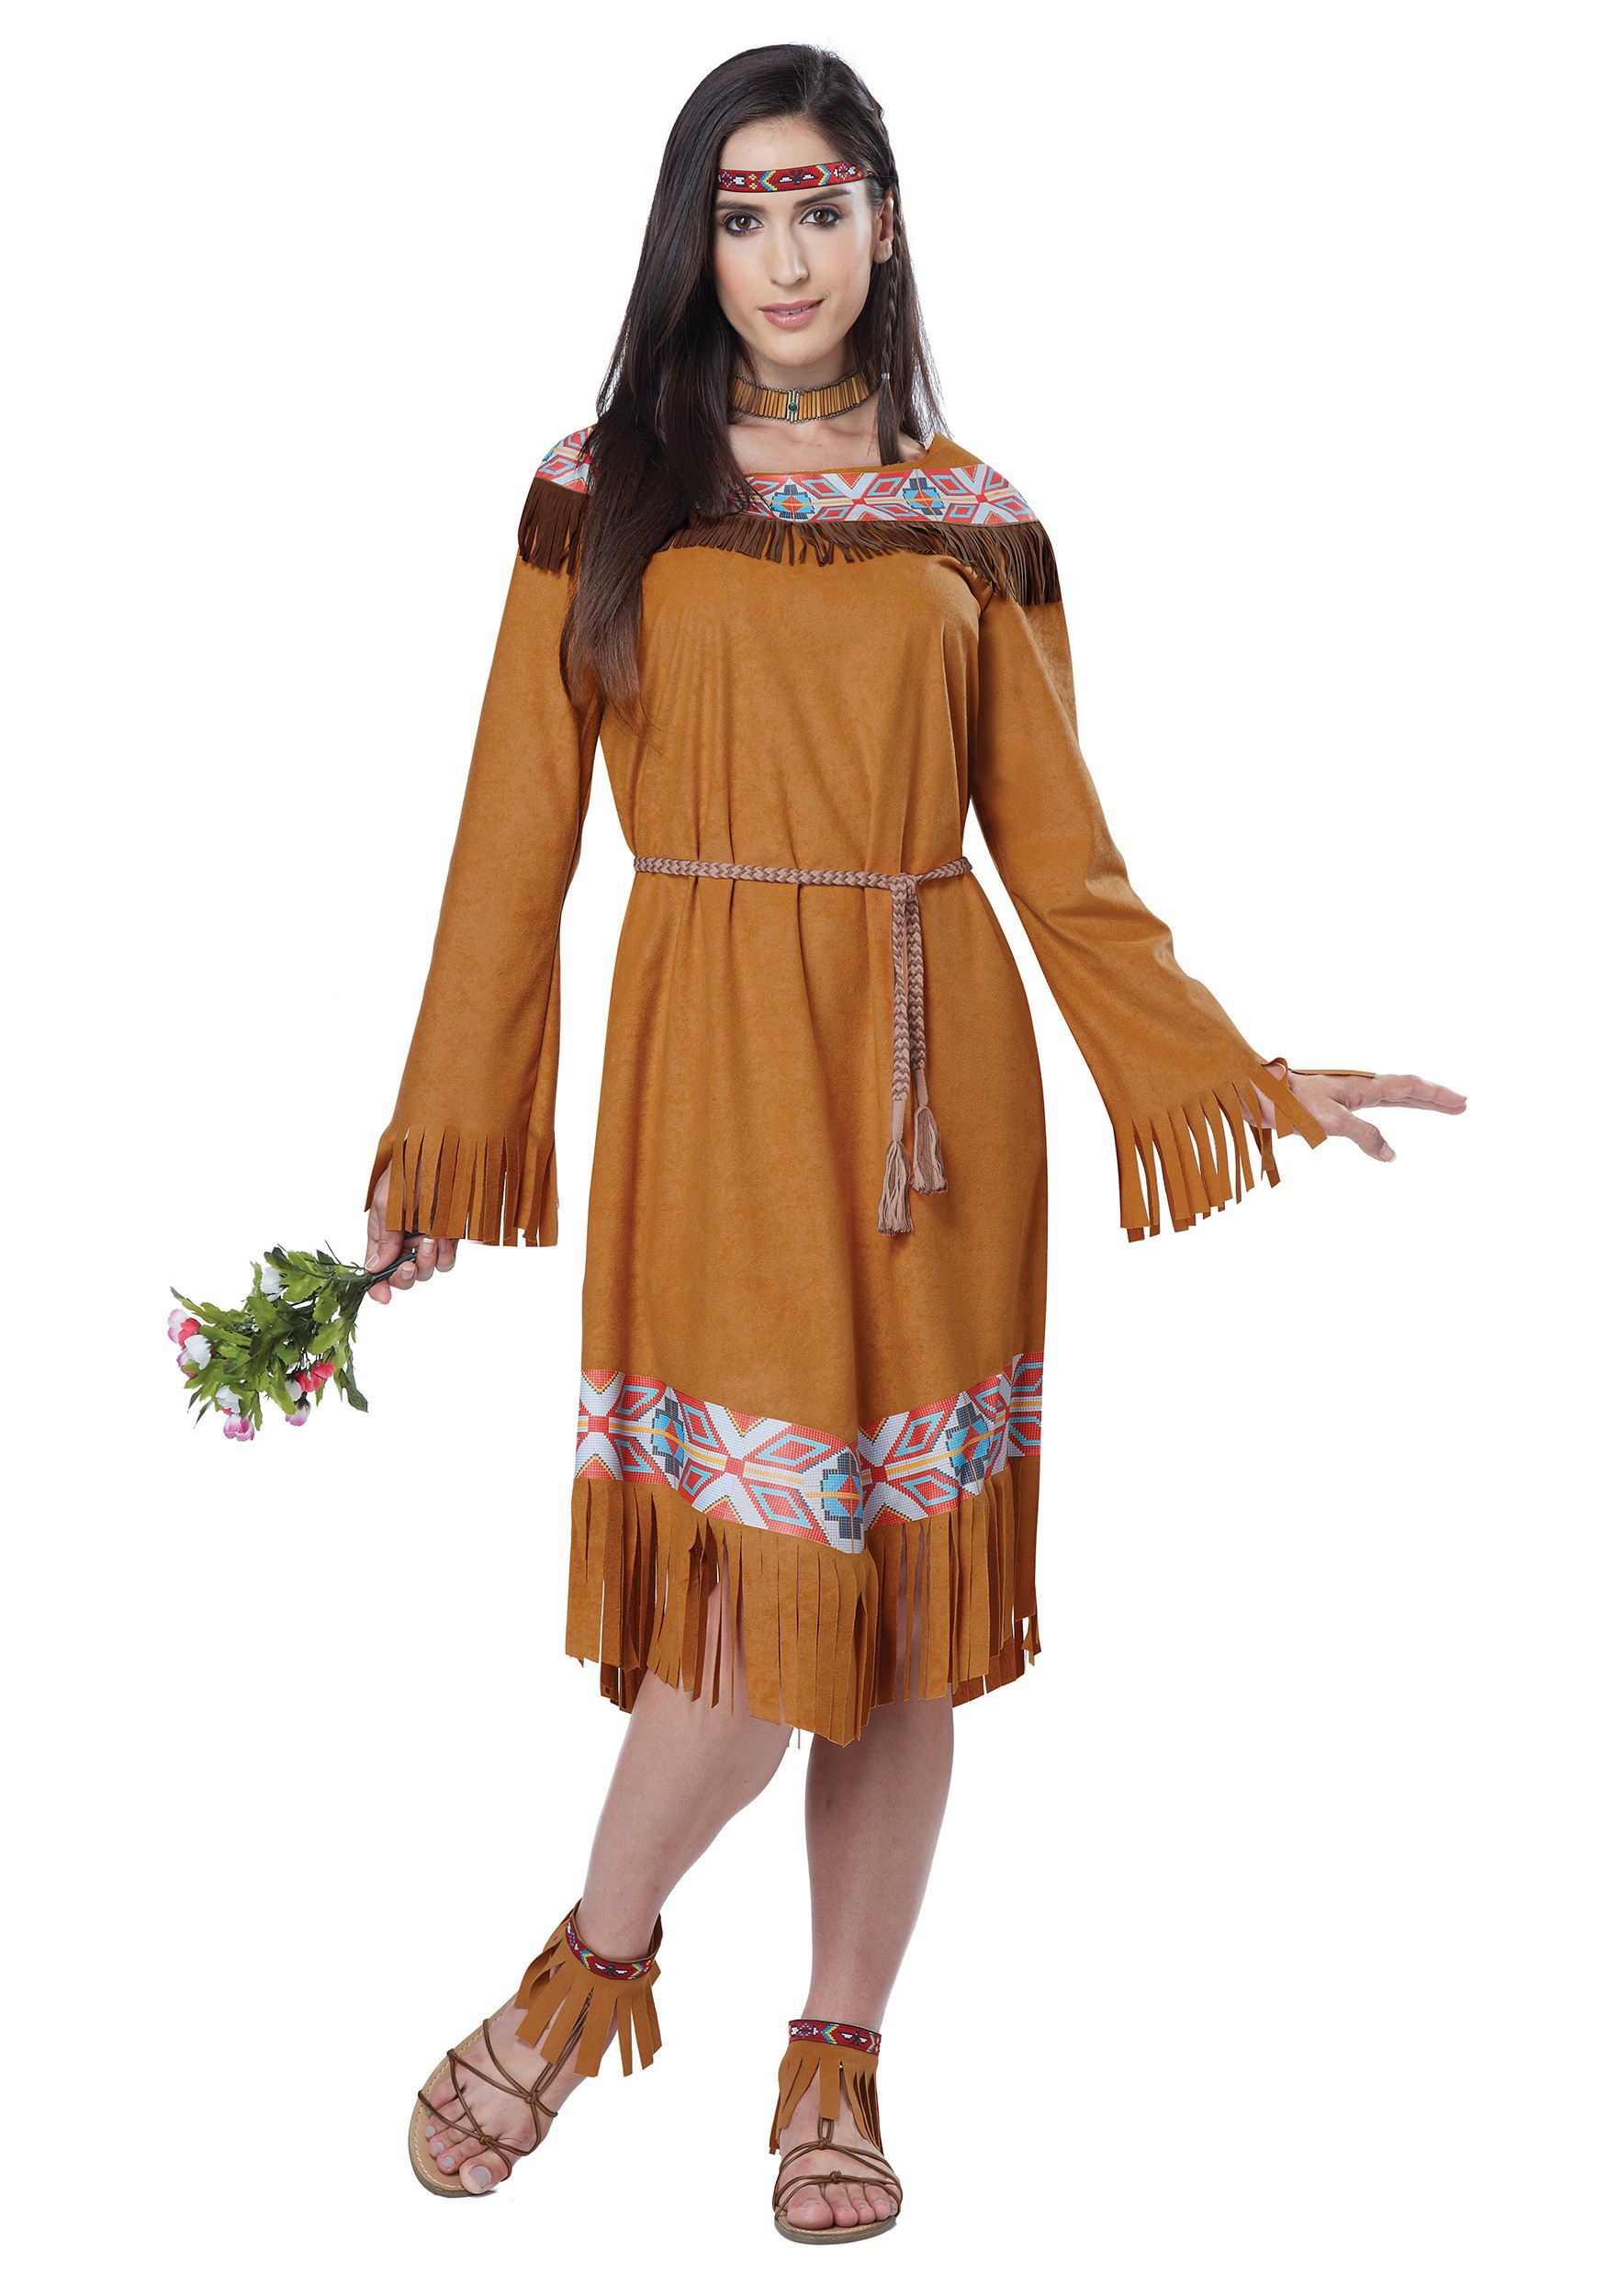 Ca54 Classic Pocahontas Indian Maiden Dress Up Woman Wild West Western Costume Ebay